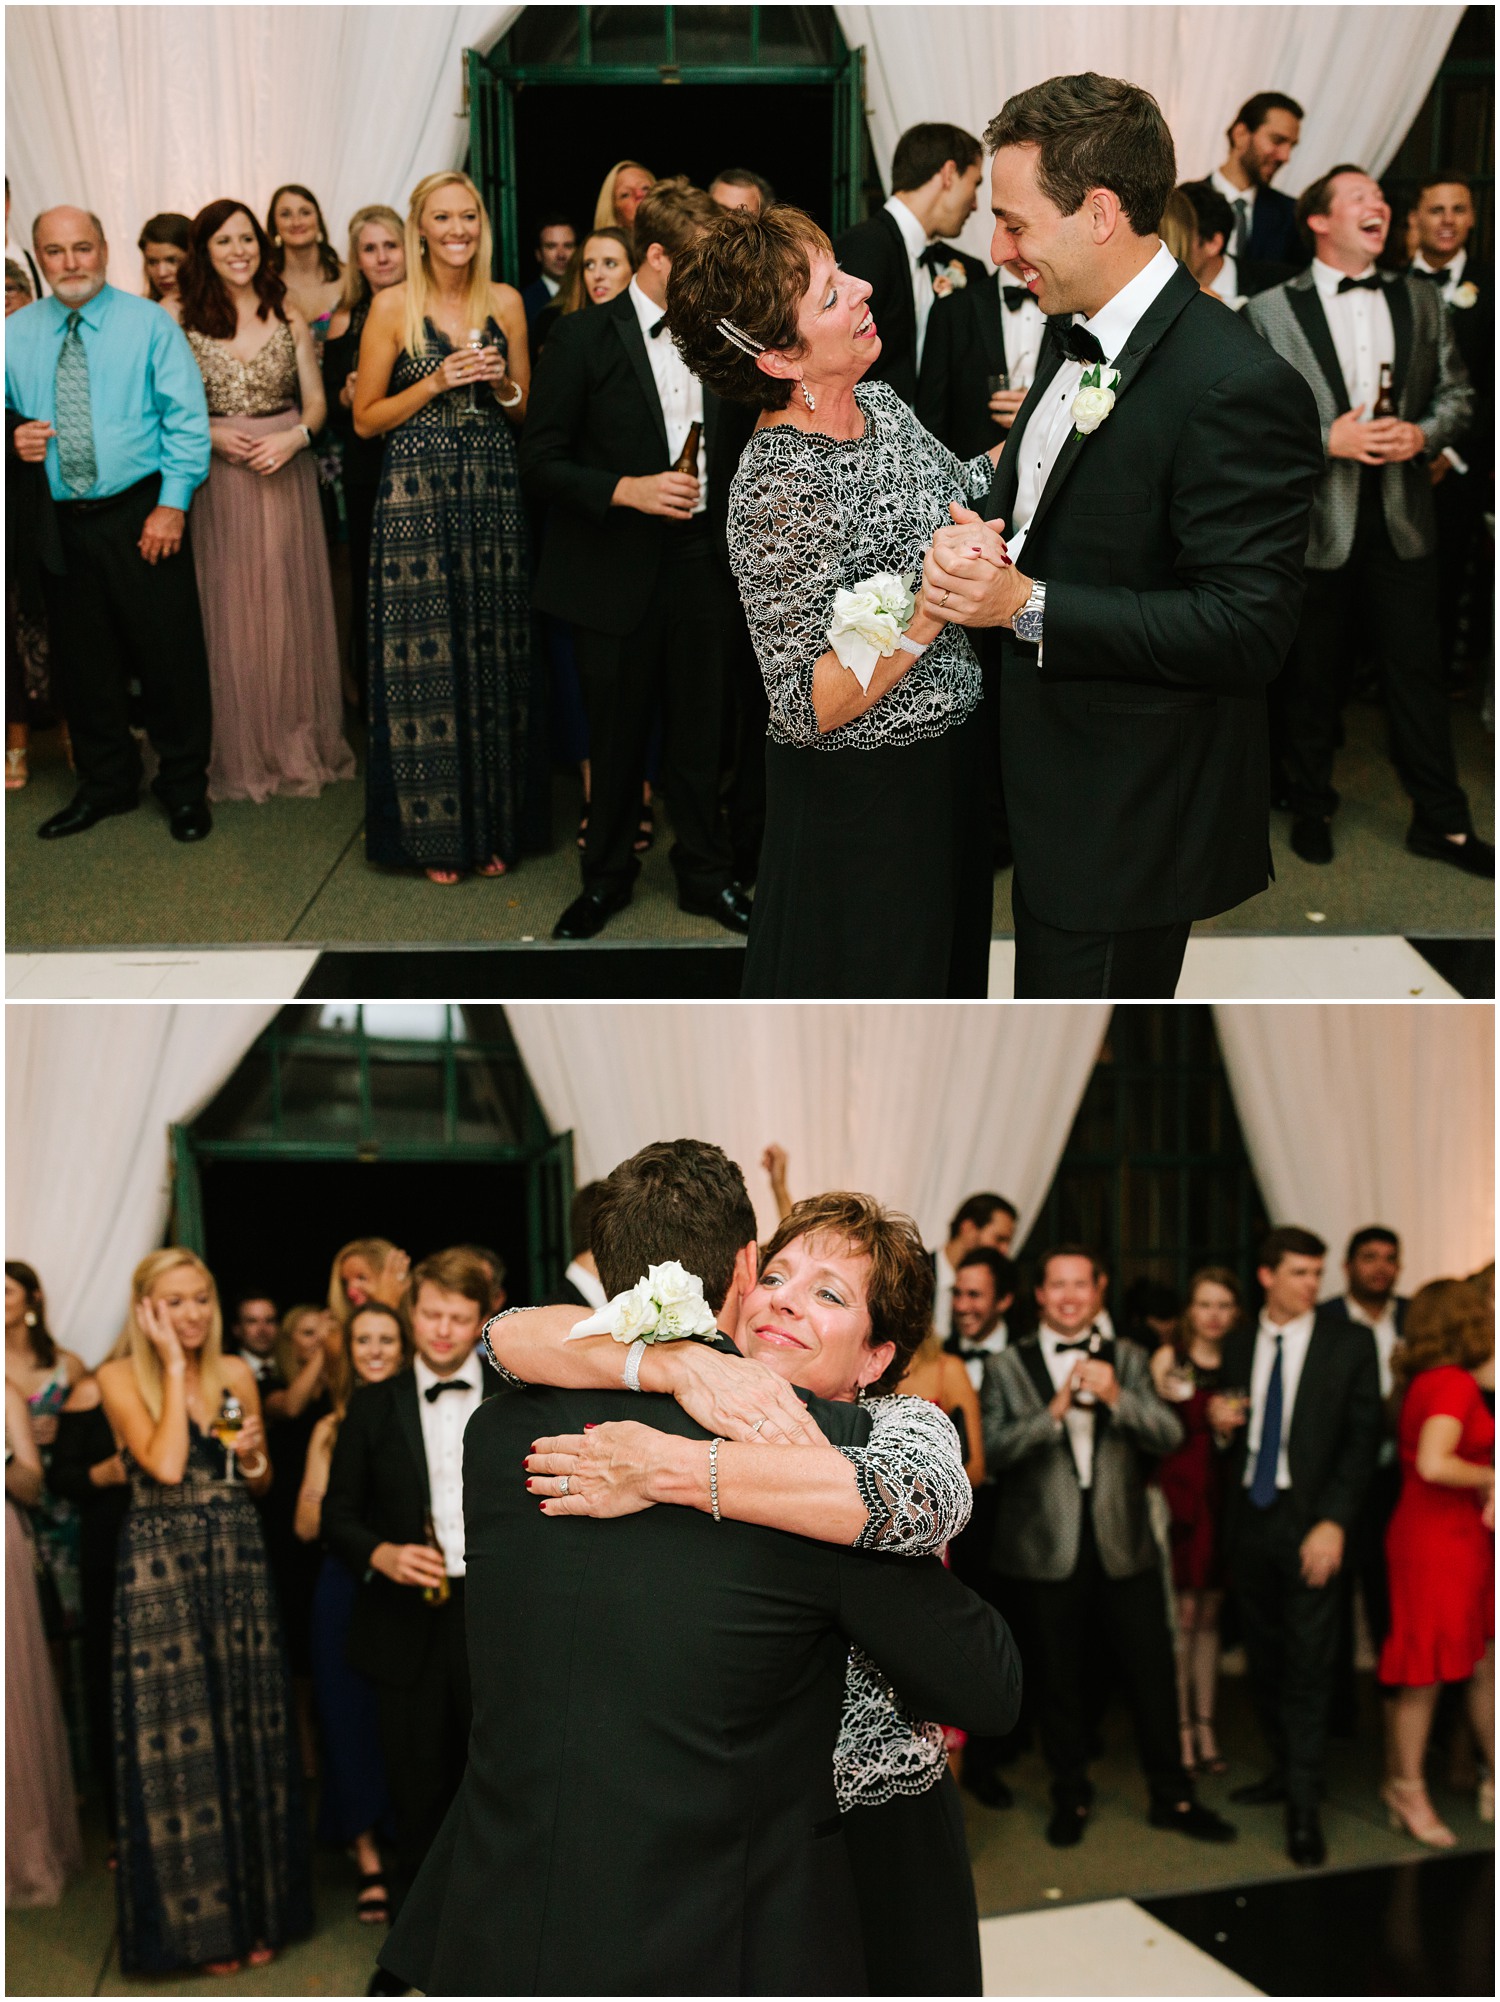 mother-son dance at wedding reception at Graylyn Estate